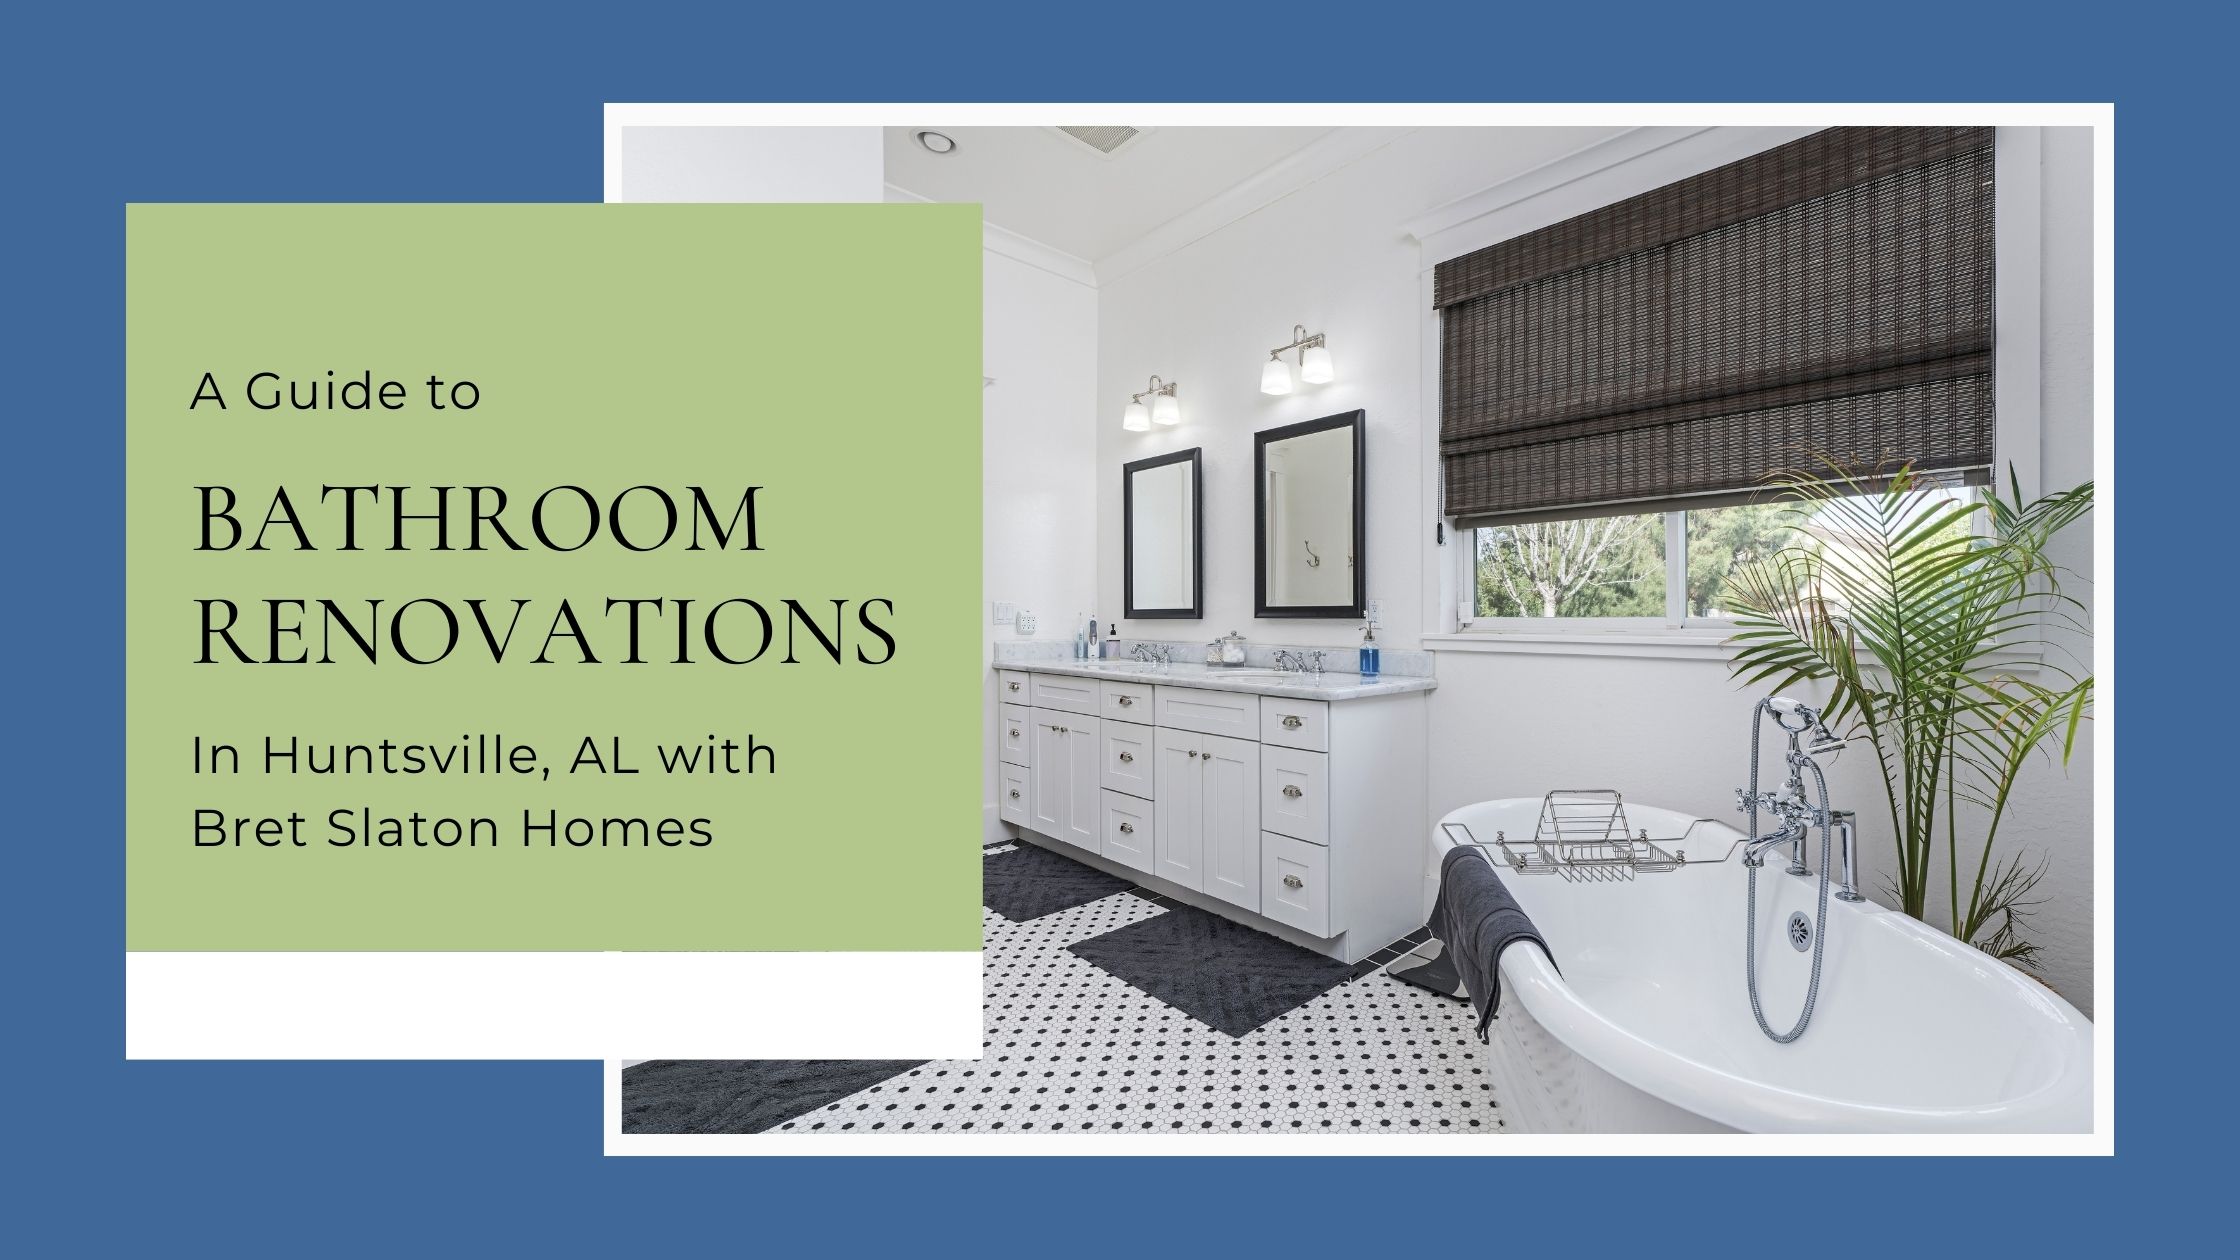 Transforming Spaces: A Guide to Bathroom Renovations in Huntsville, AL with Bret Slaton Homes